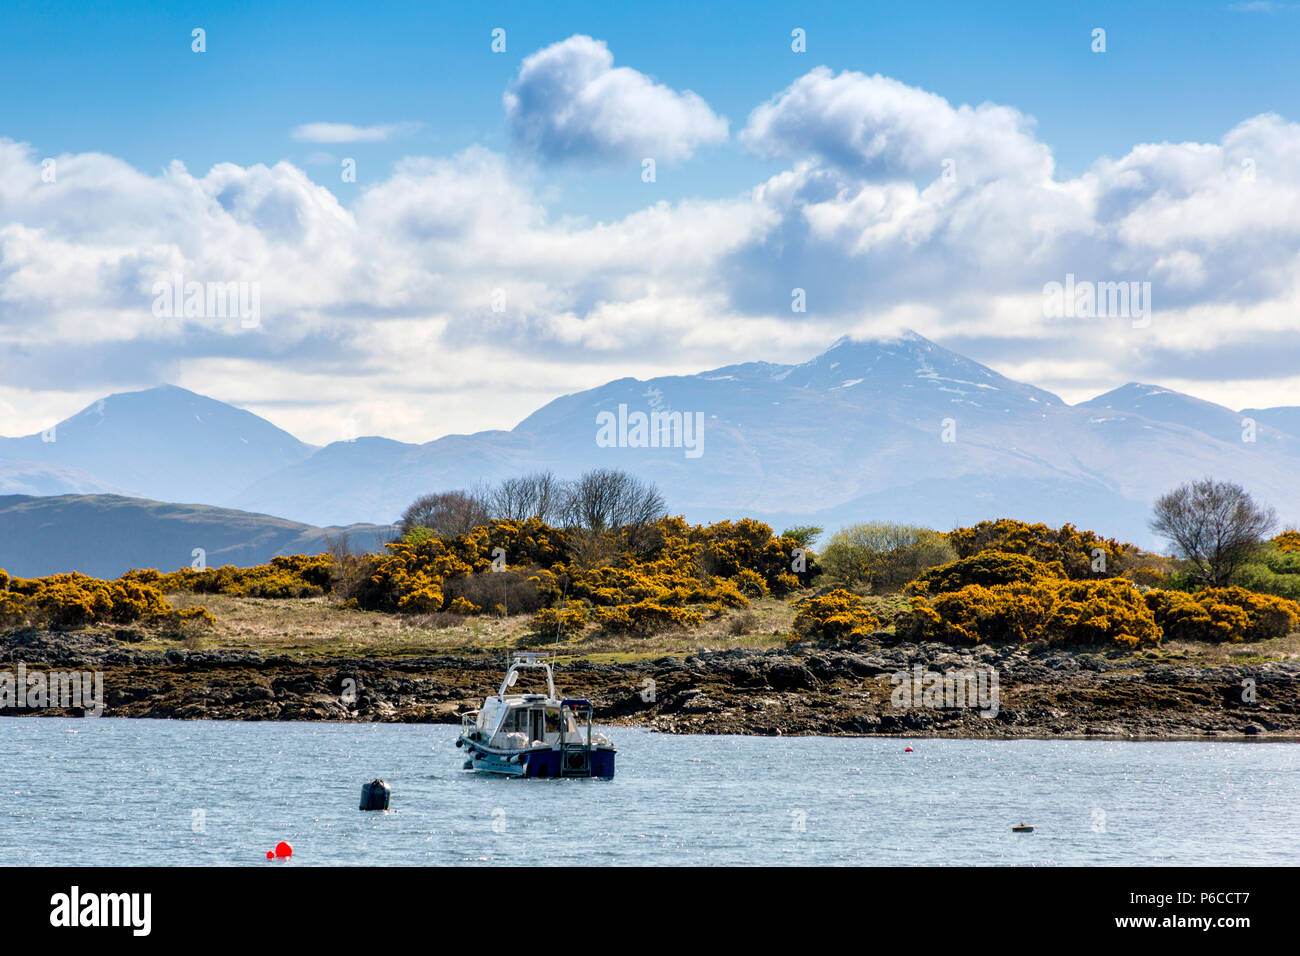 Looking across Lismore Island at snow on the summits of peaks beyond from an Oban - Mull ferry, Argyll and Bute, Scotland, UK Stock Photo